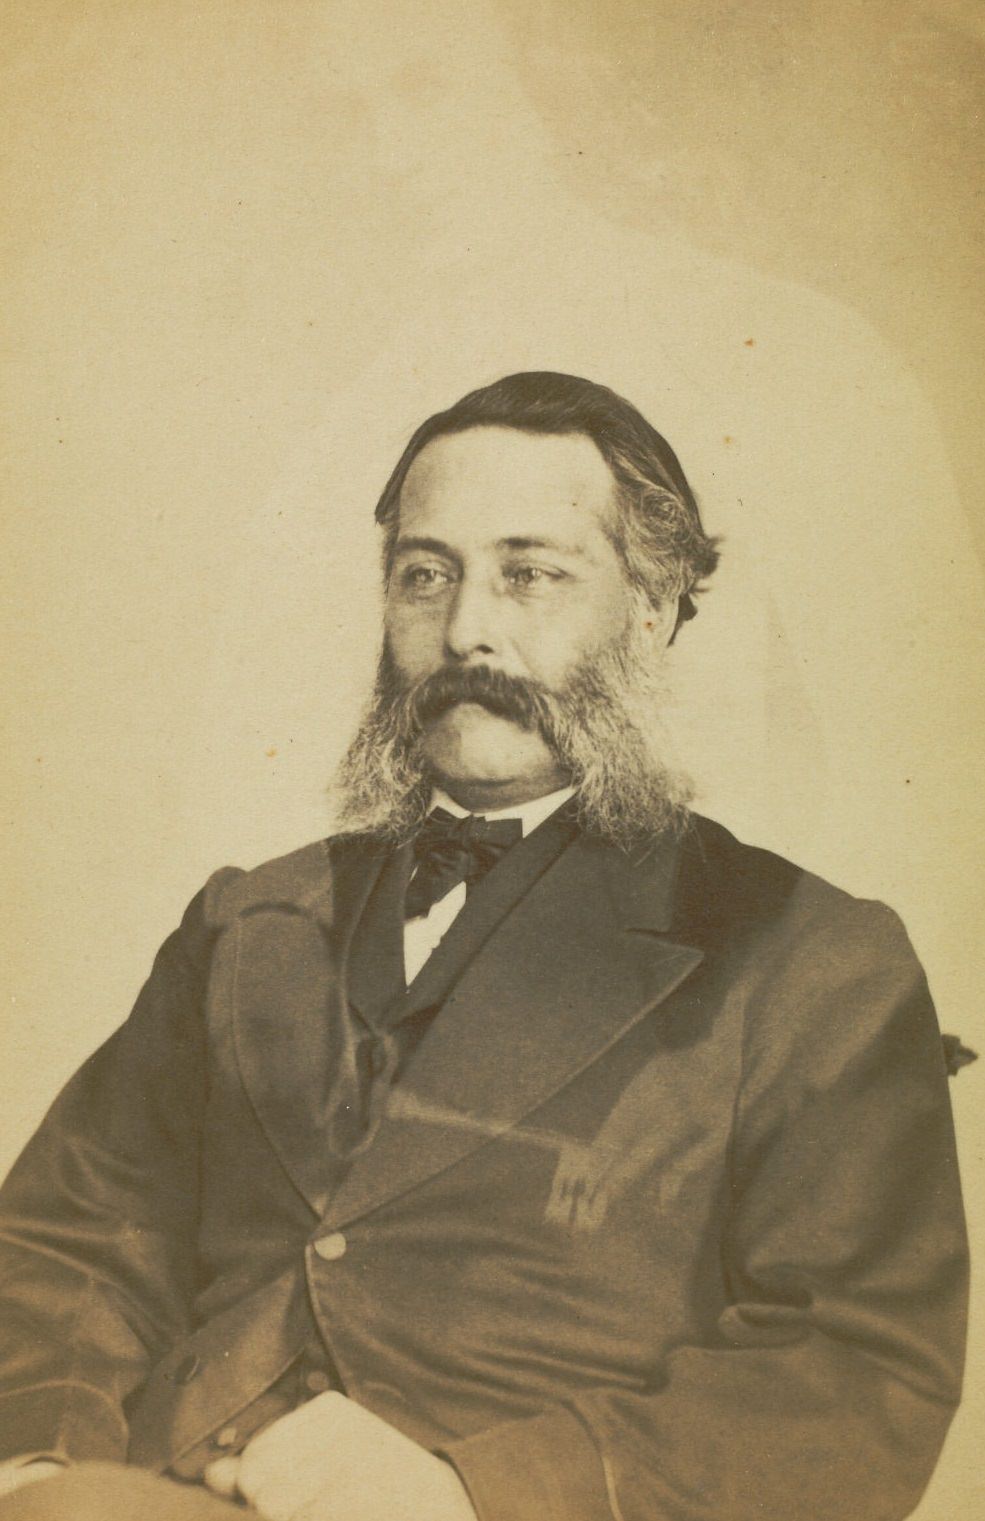 Portrait of L.A. Bigelow with mutton chop whiskers, with the faint image of a woman visible behind him.